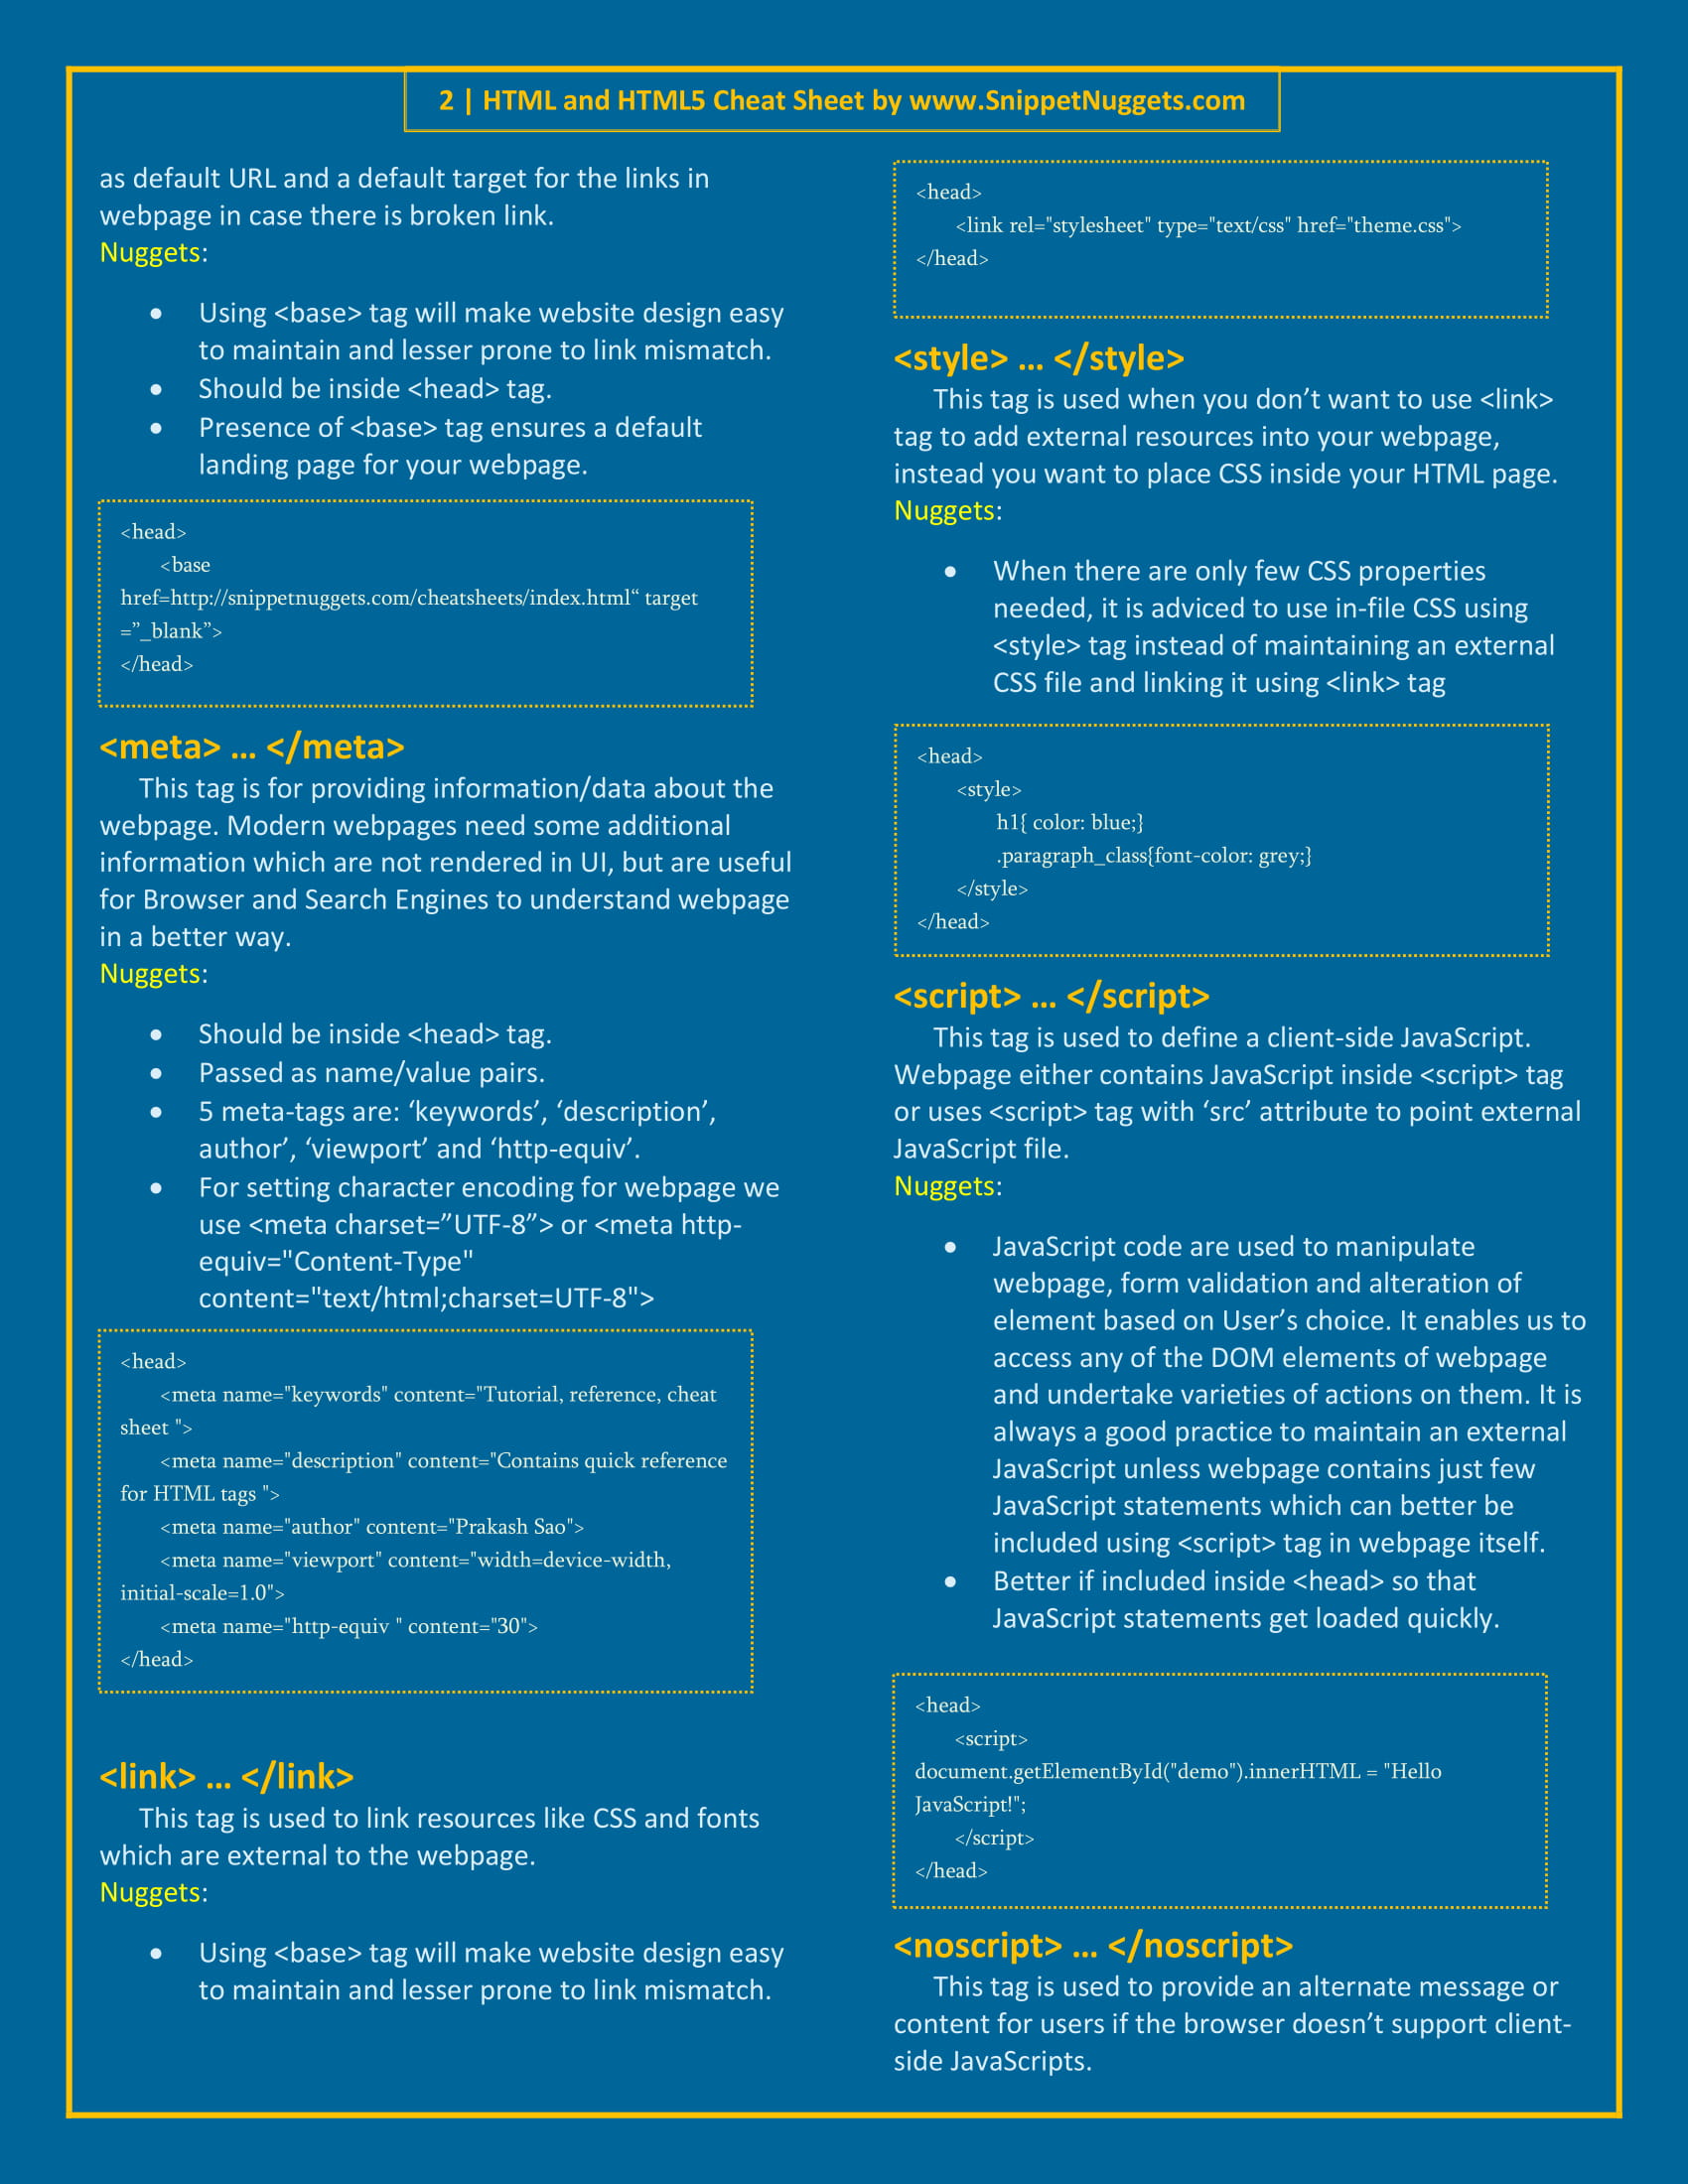 html cheat sheet for 2019 document information tags base meta link style script noscript  www.snippetnuggets.com